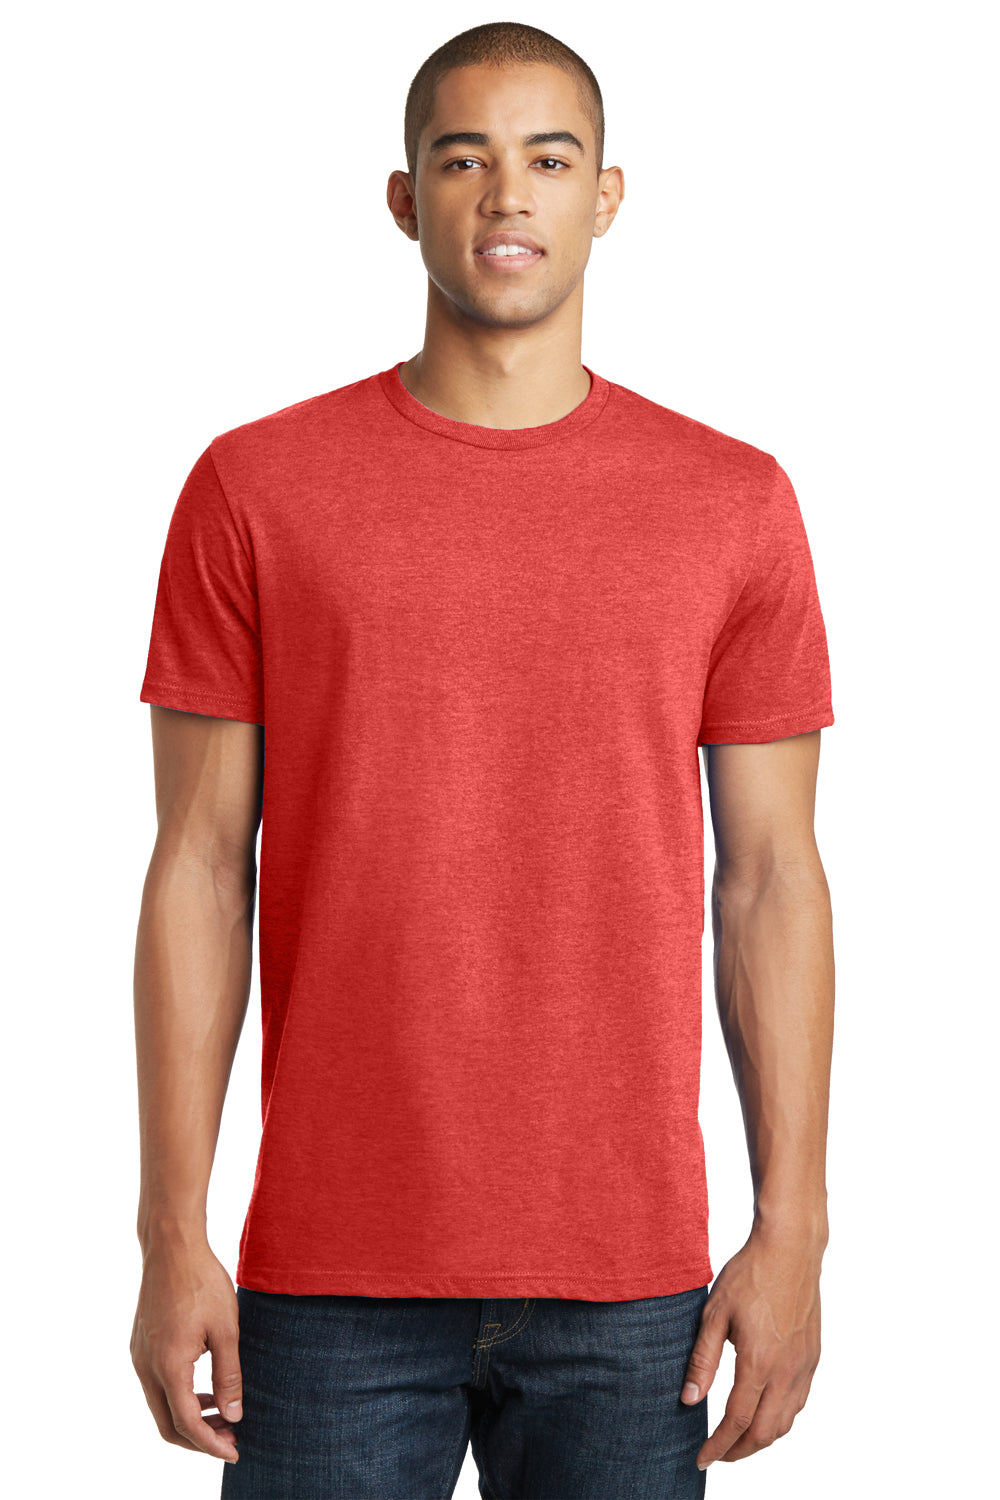 District DT5000 Mens The Concert Short Sleeve Crewneck T-Shirt Heather New Red Front